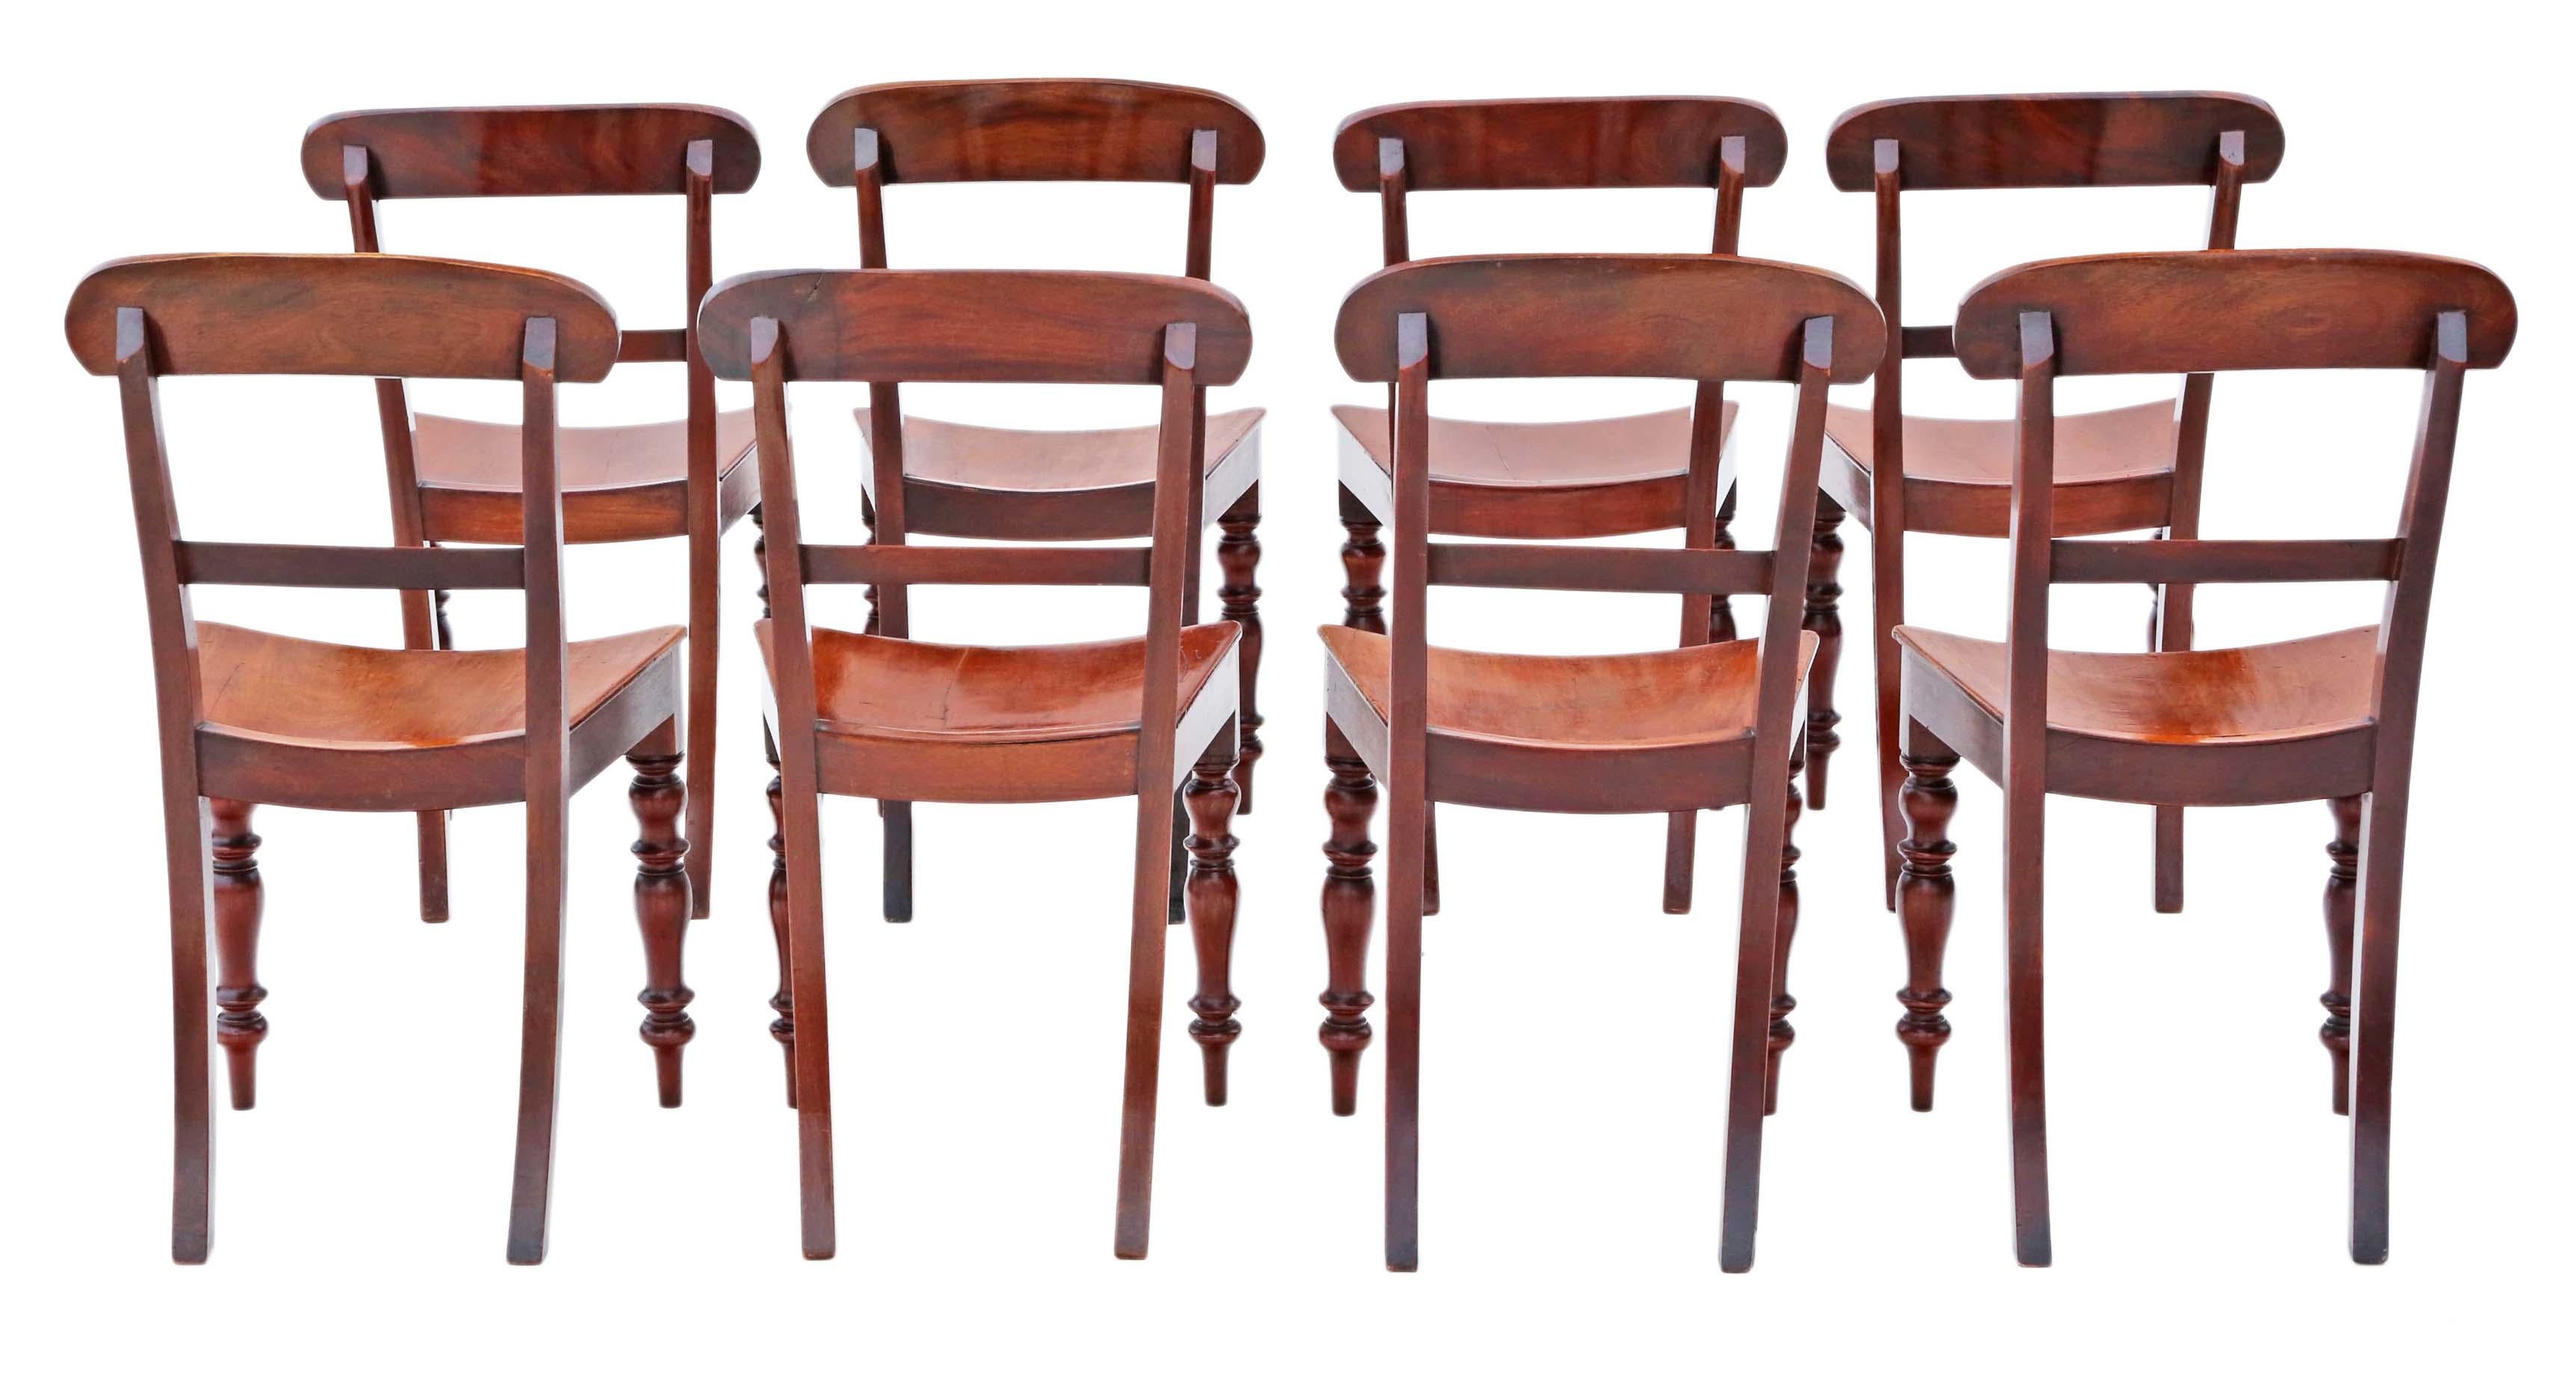 Discover a stunning matched set of 8 mahogany kitchen or dining chairs from the 19th Century, circa 1860. This fine quality antique collection boasts exceptional craftsmanship and timeless elegance.

These chairs offer a unique feature - they are